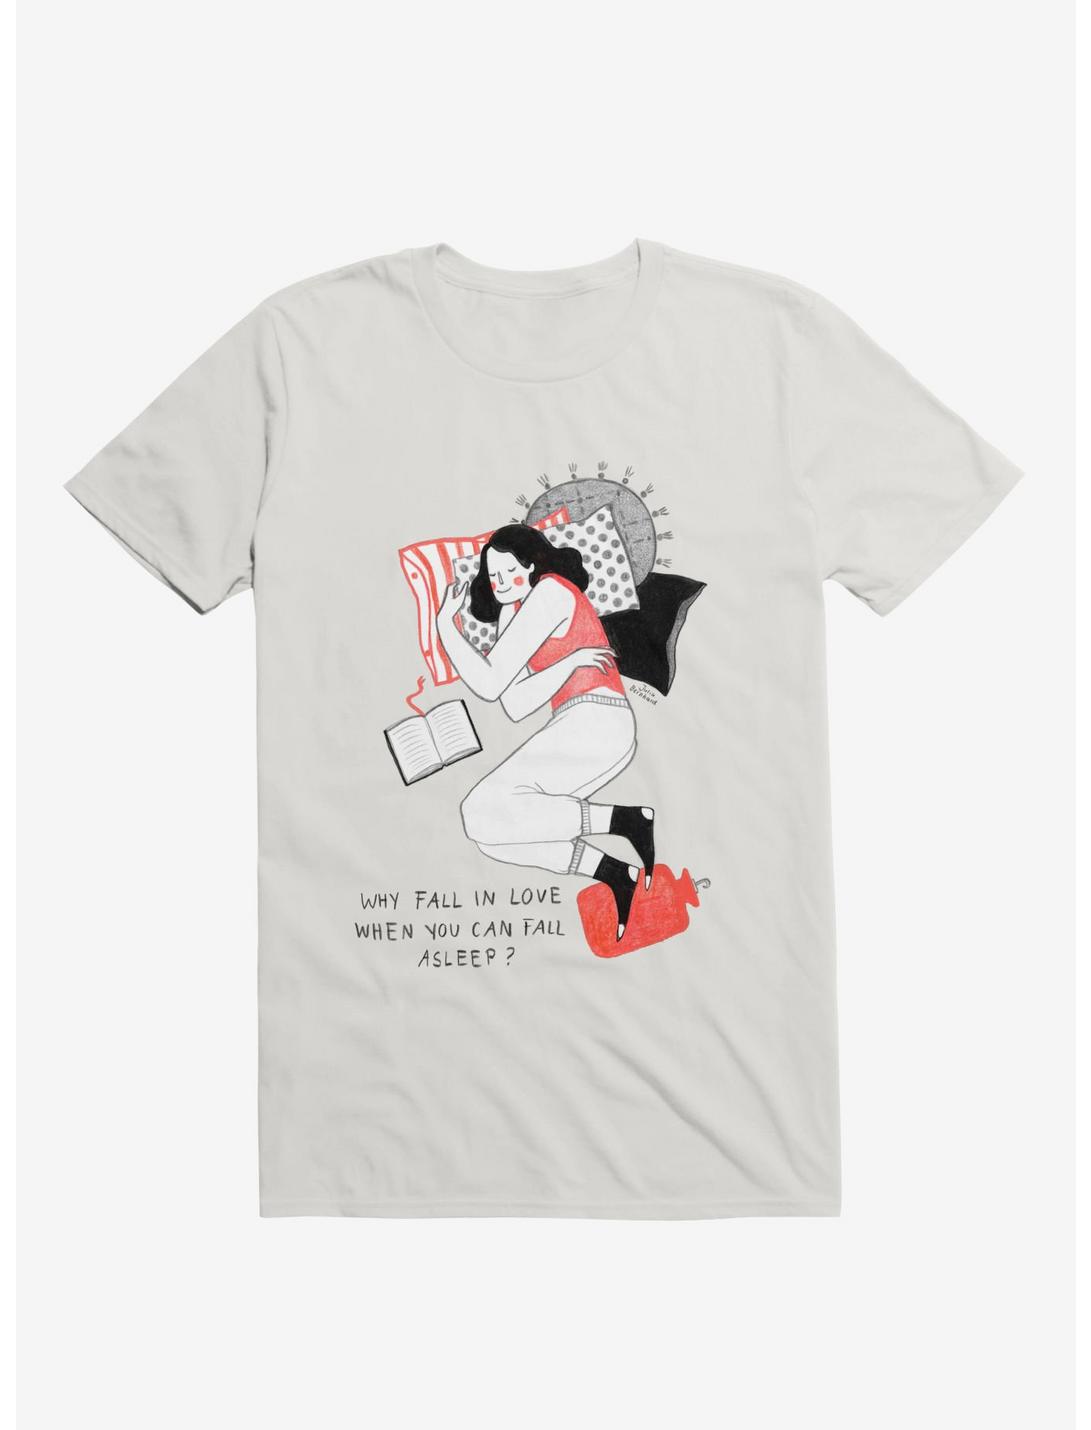 Why Fall In Love? T-Shirt, WHITE, hi-res